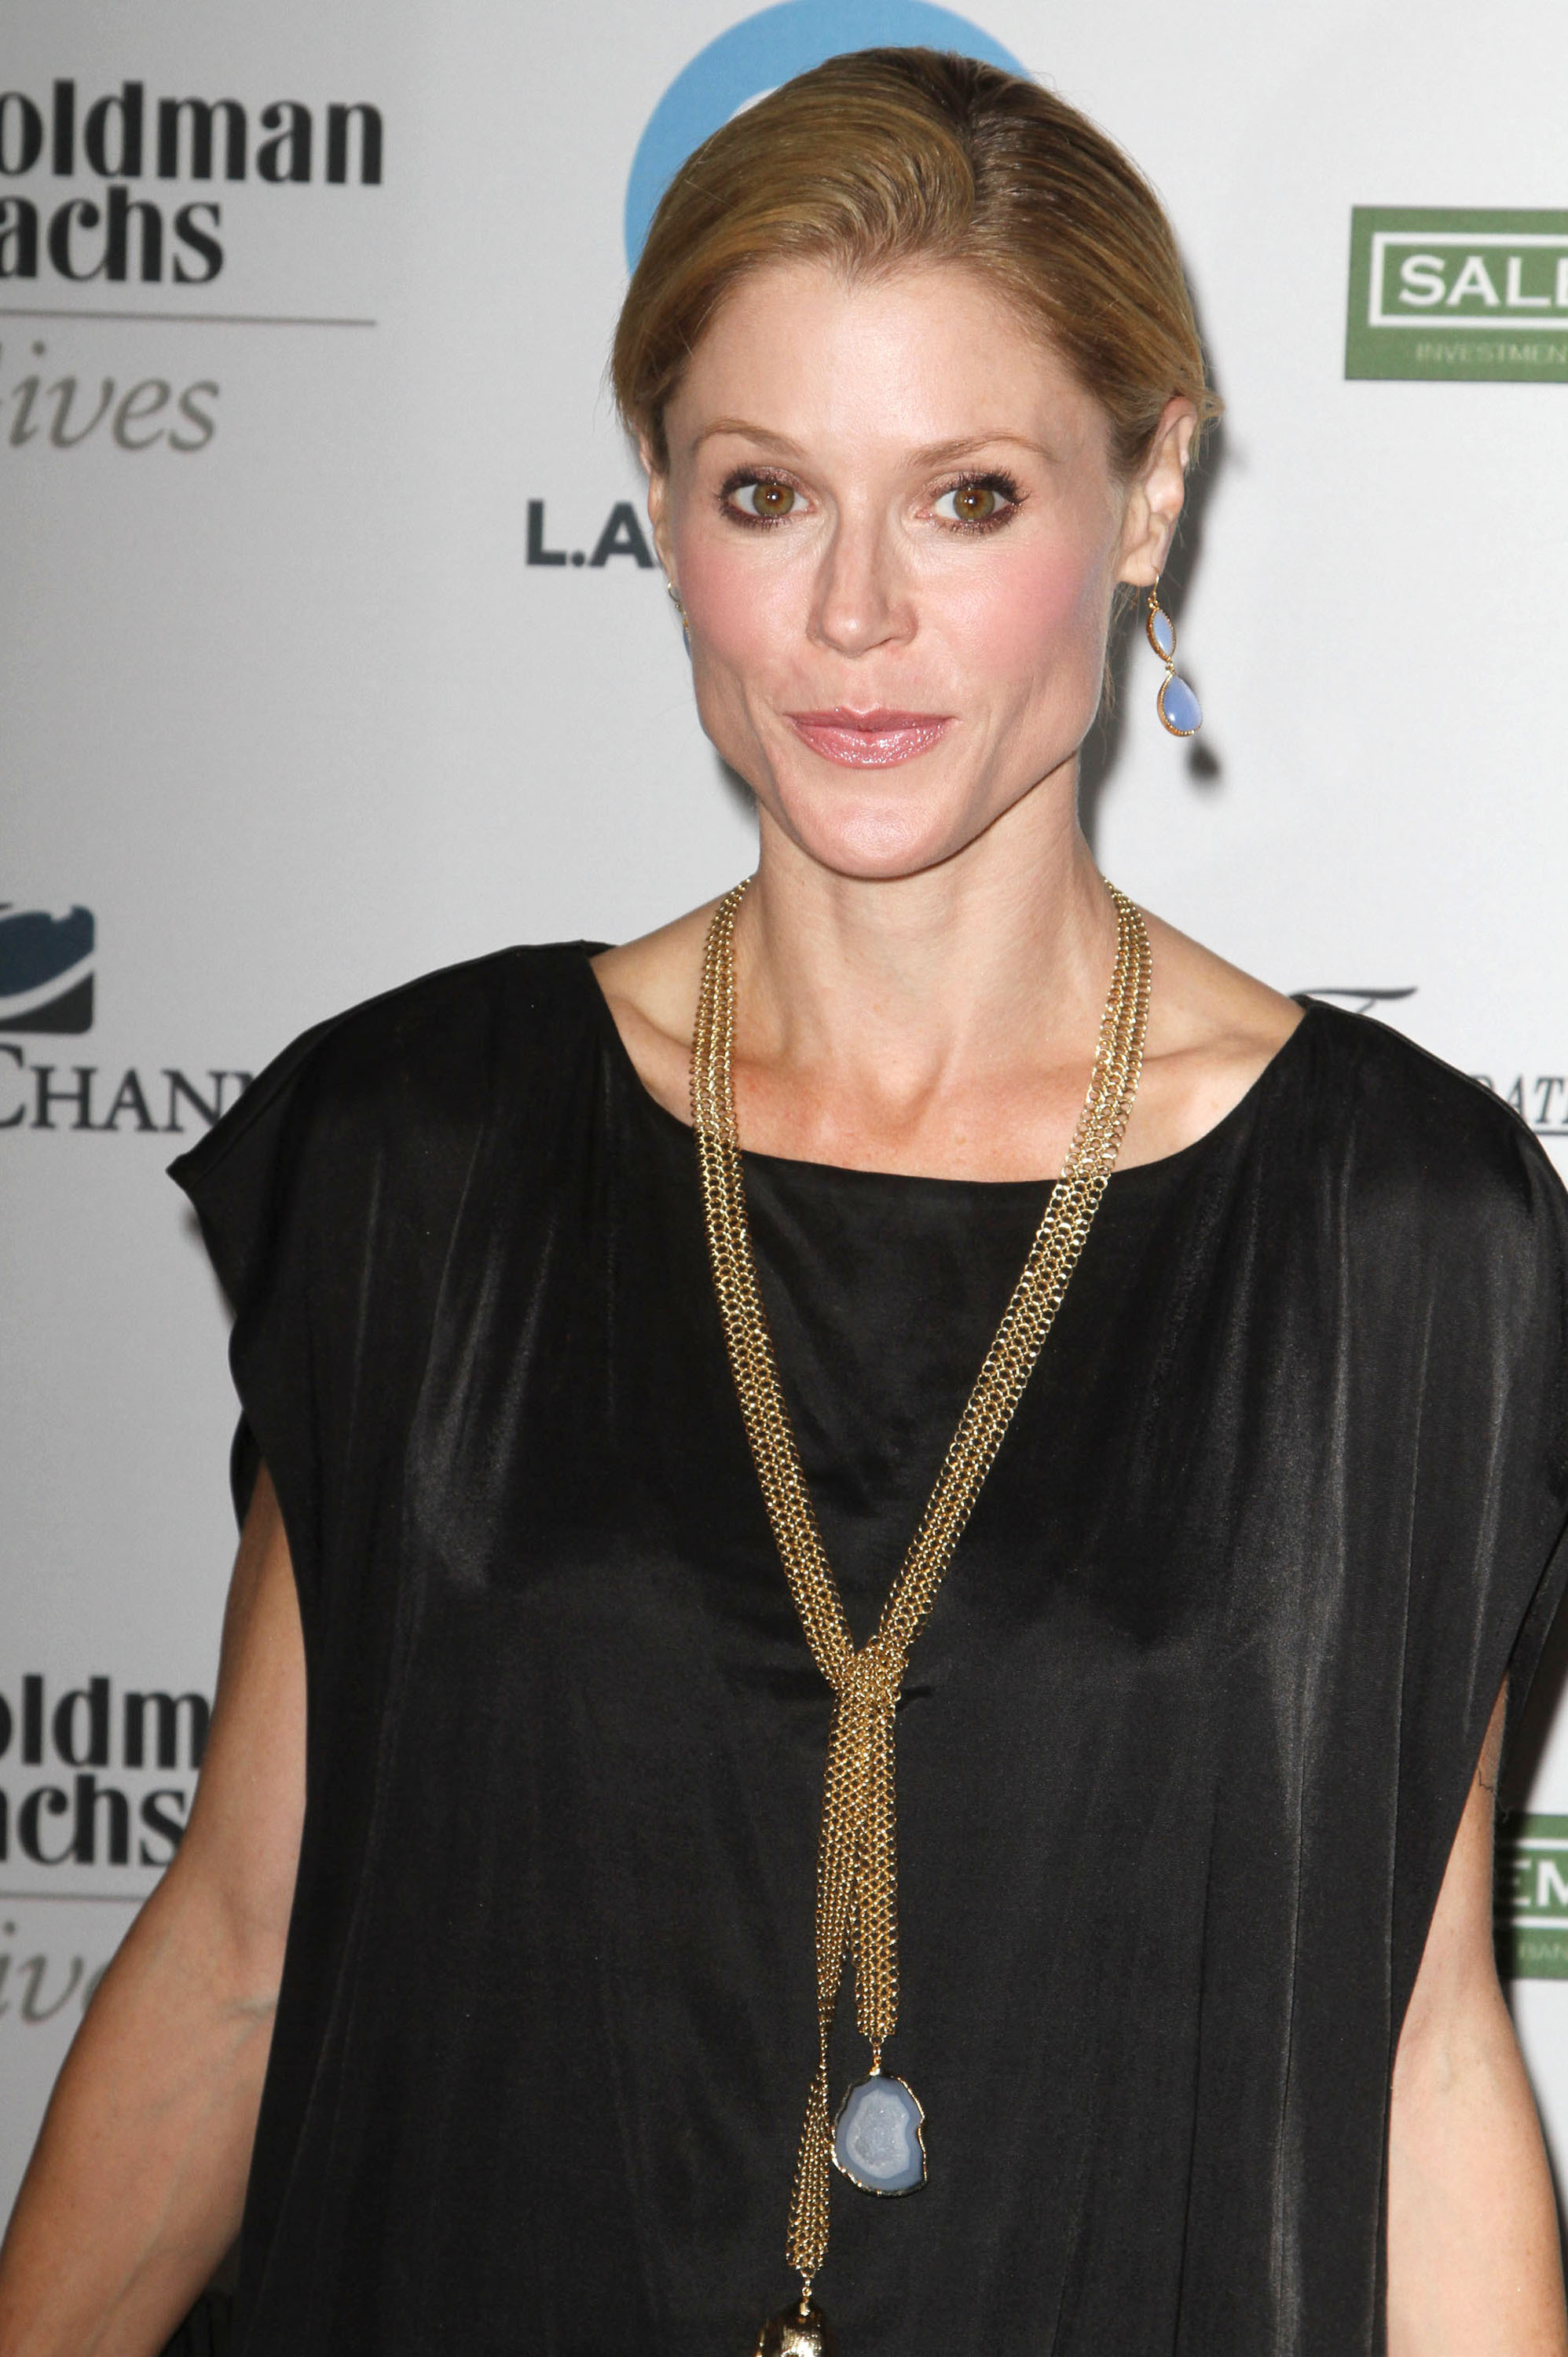 Julie Bowen - Promise 2011 Gala at the Grand Ballroom, Hollywood & Highland - Arrivals | Picture 88758